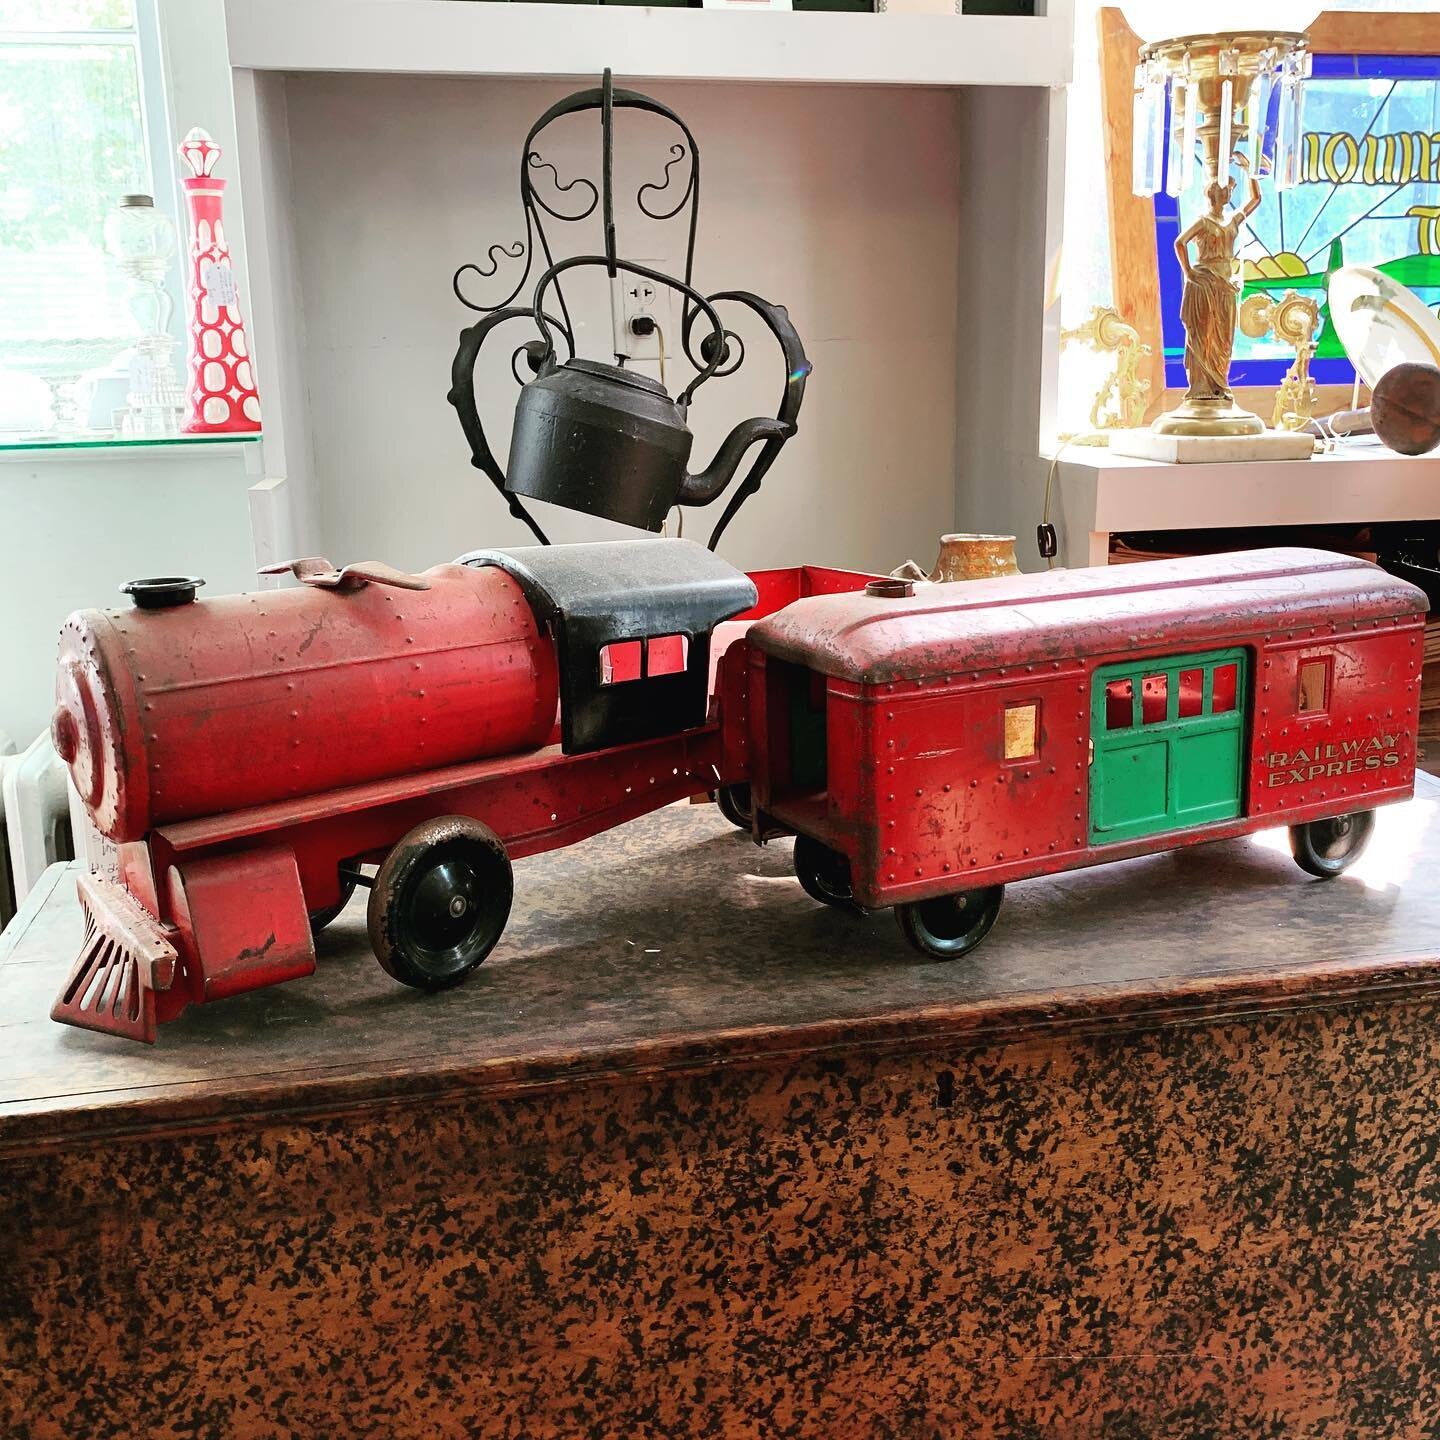 Who was the child playing with this toy train? Did her mother make tea in a black iron kettle as she choo-chooed the toy across the floor? Who did the girl grow up to be? 

Found at W.M. Schwind, Jr. Antiques &amp; Fine Art, Yarmouth, Maine

#histori